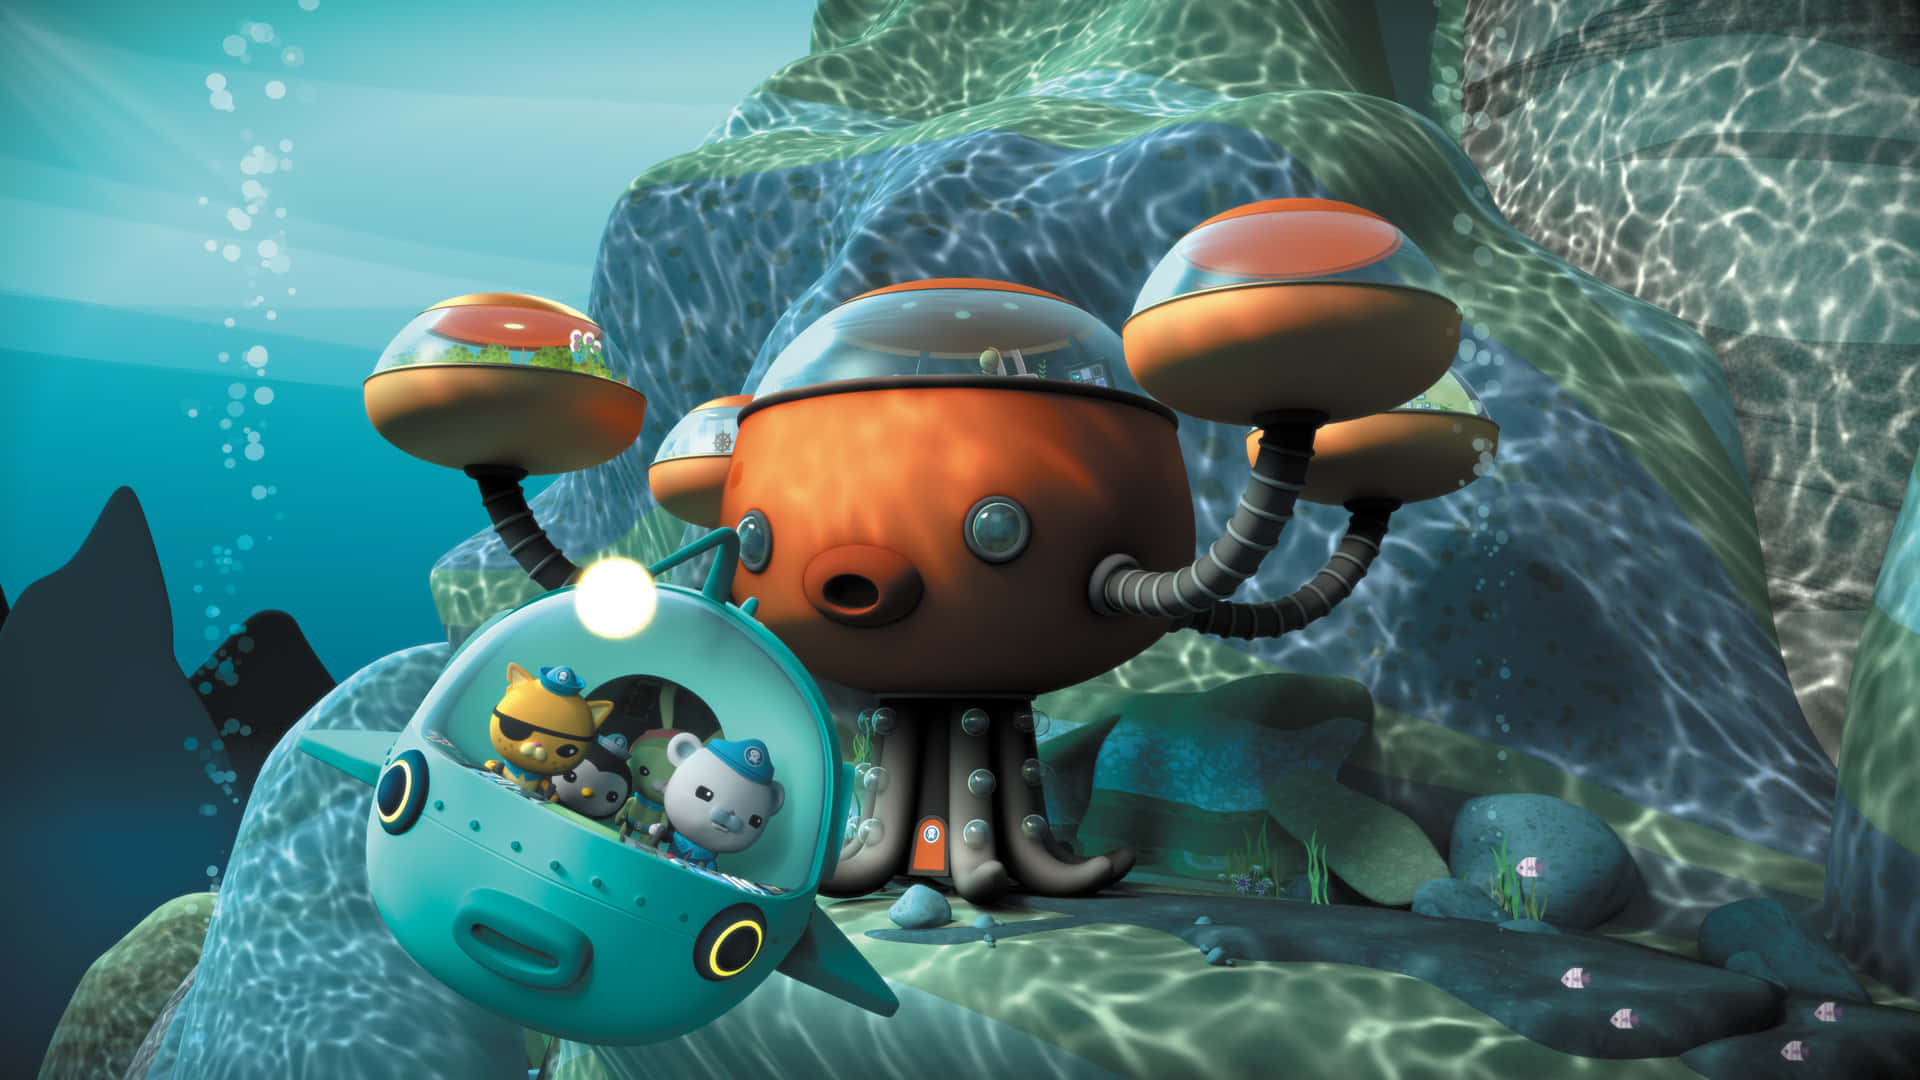 Join the brave Octonauts on their thrilling adventures! Wallpaper